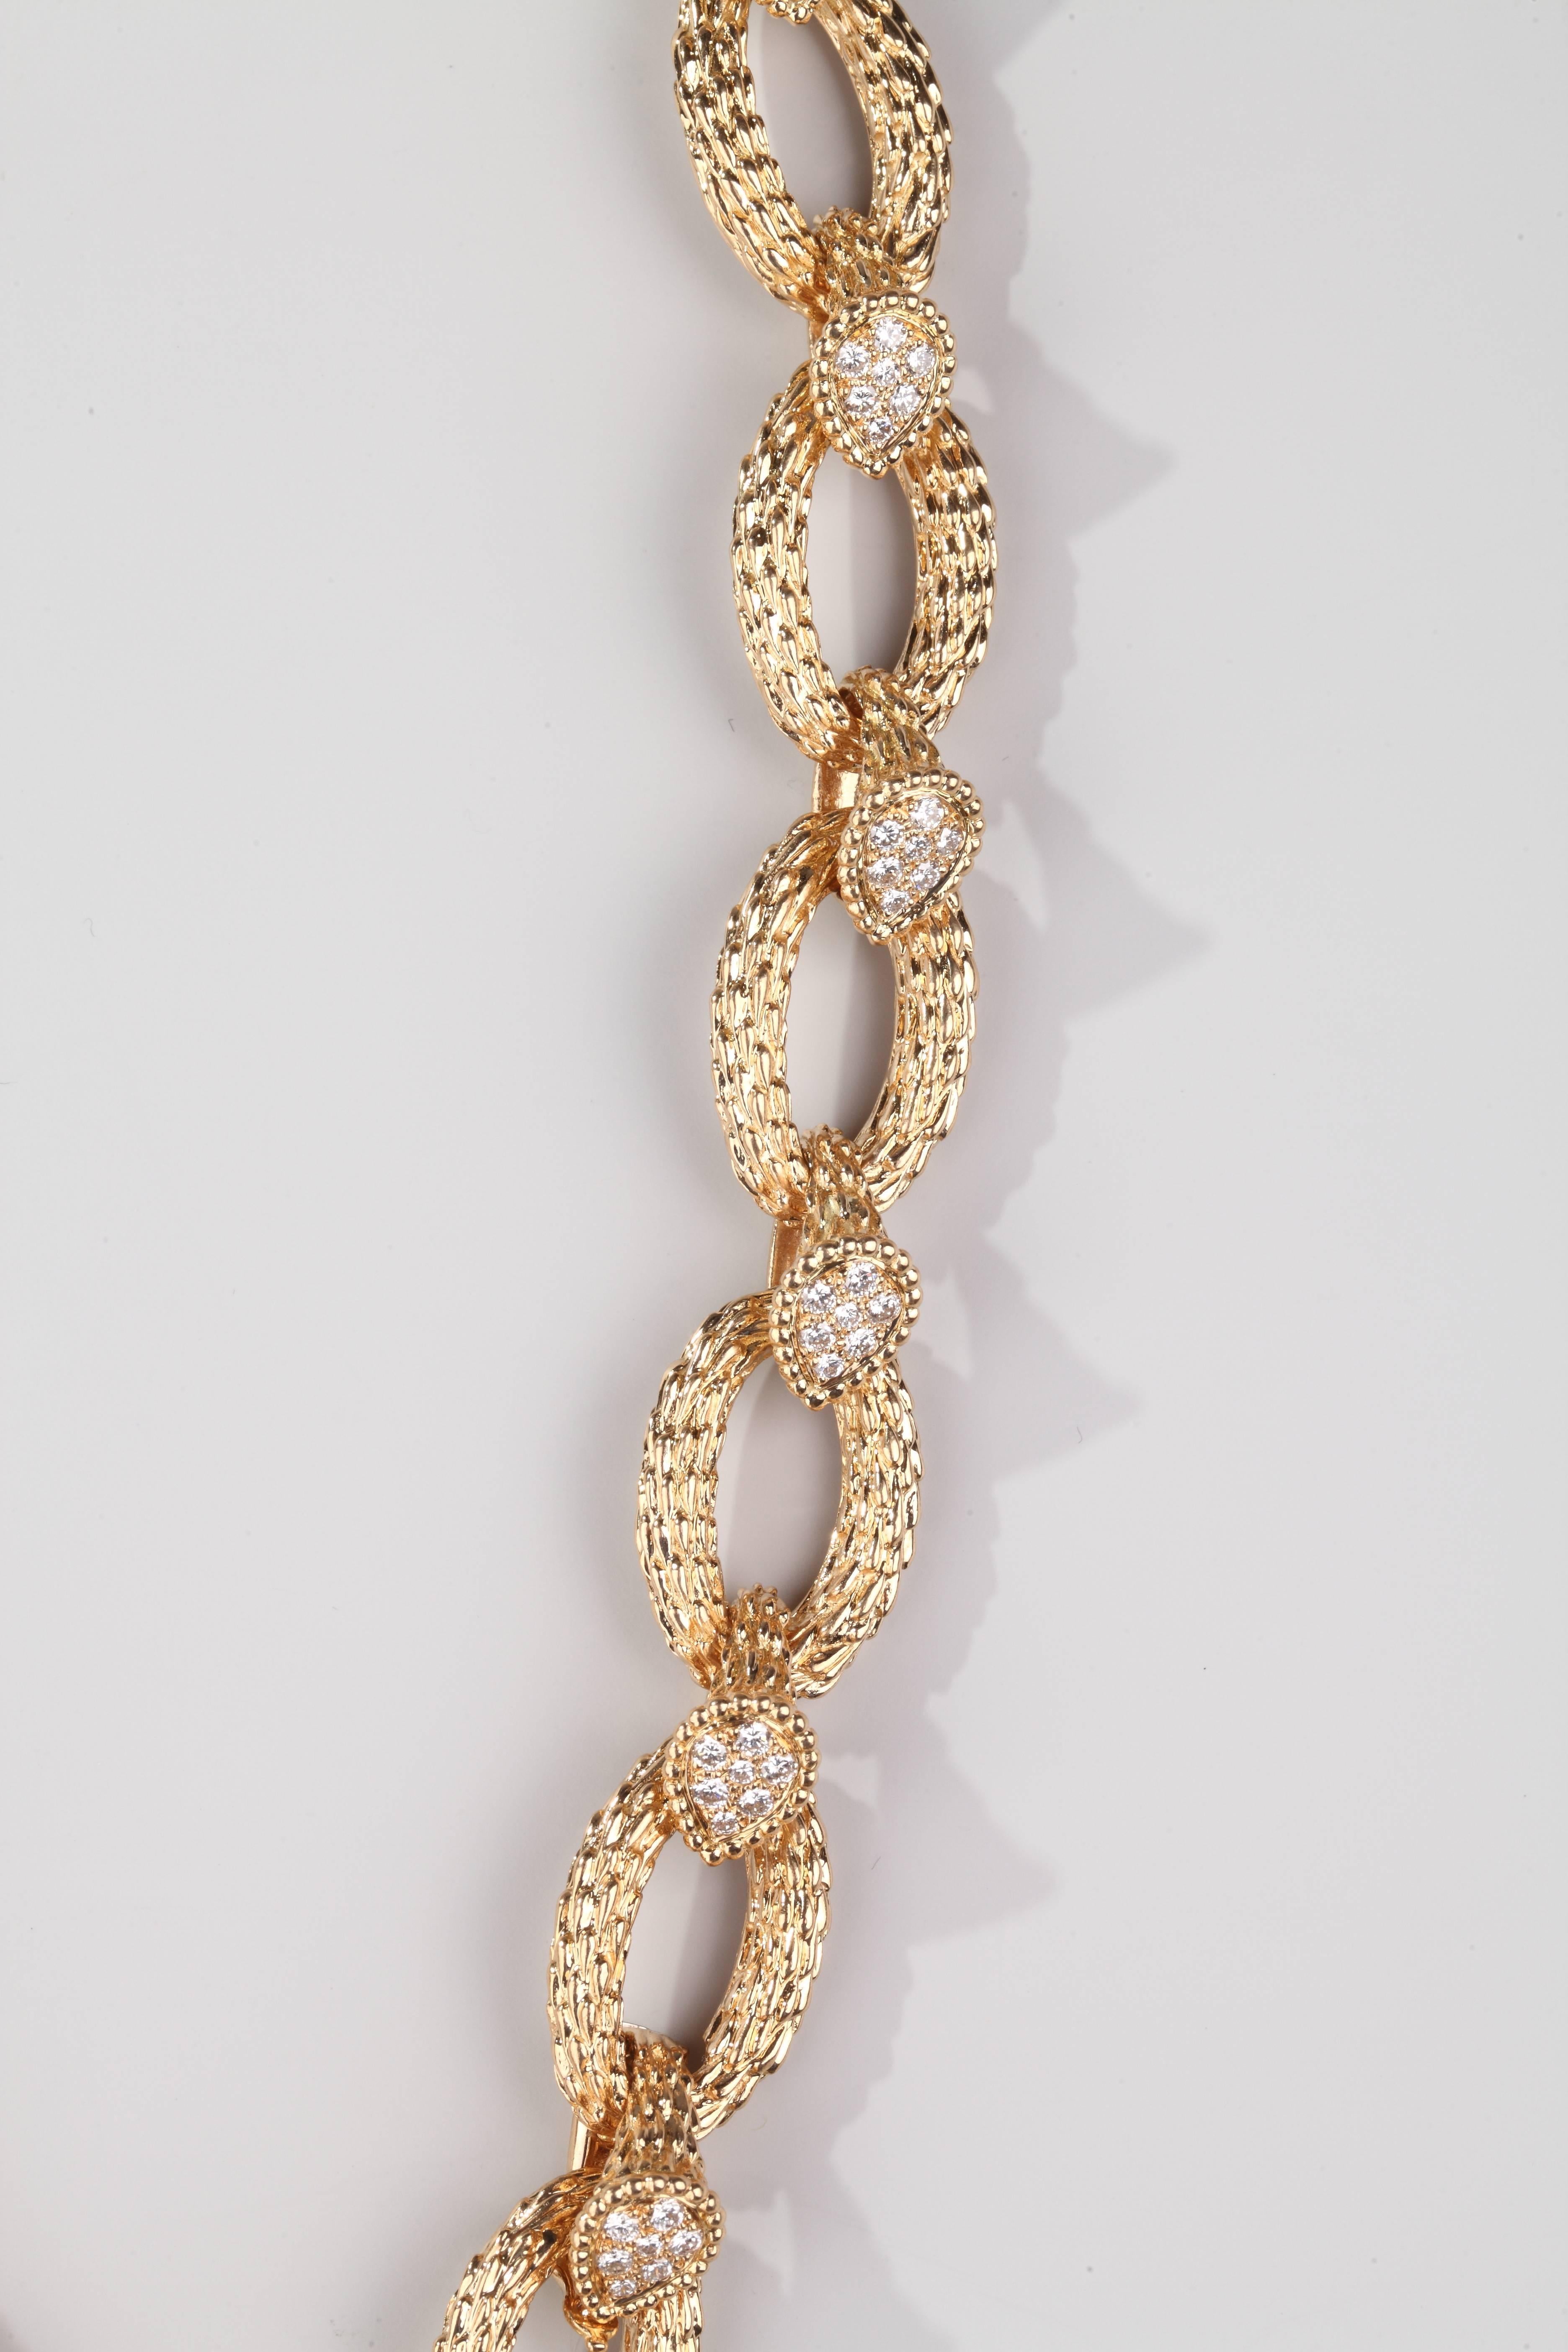 A 18k yellow gold necklace with 19 pear shape motifs set with brillant cut diamonds.

This iconic necklace was first sold in 1968 by Boucheron in reference of the snake necklace created in 1888 by Frederic Boucheron for his wife Gabrielle.
This